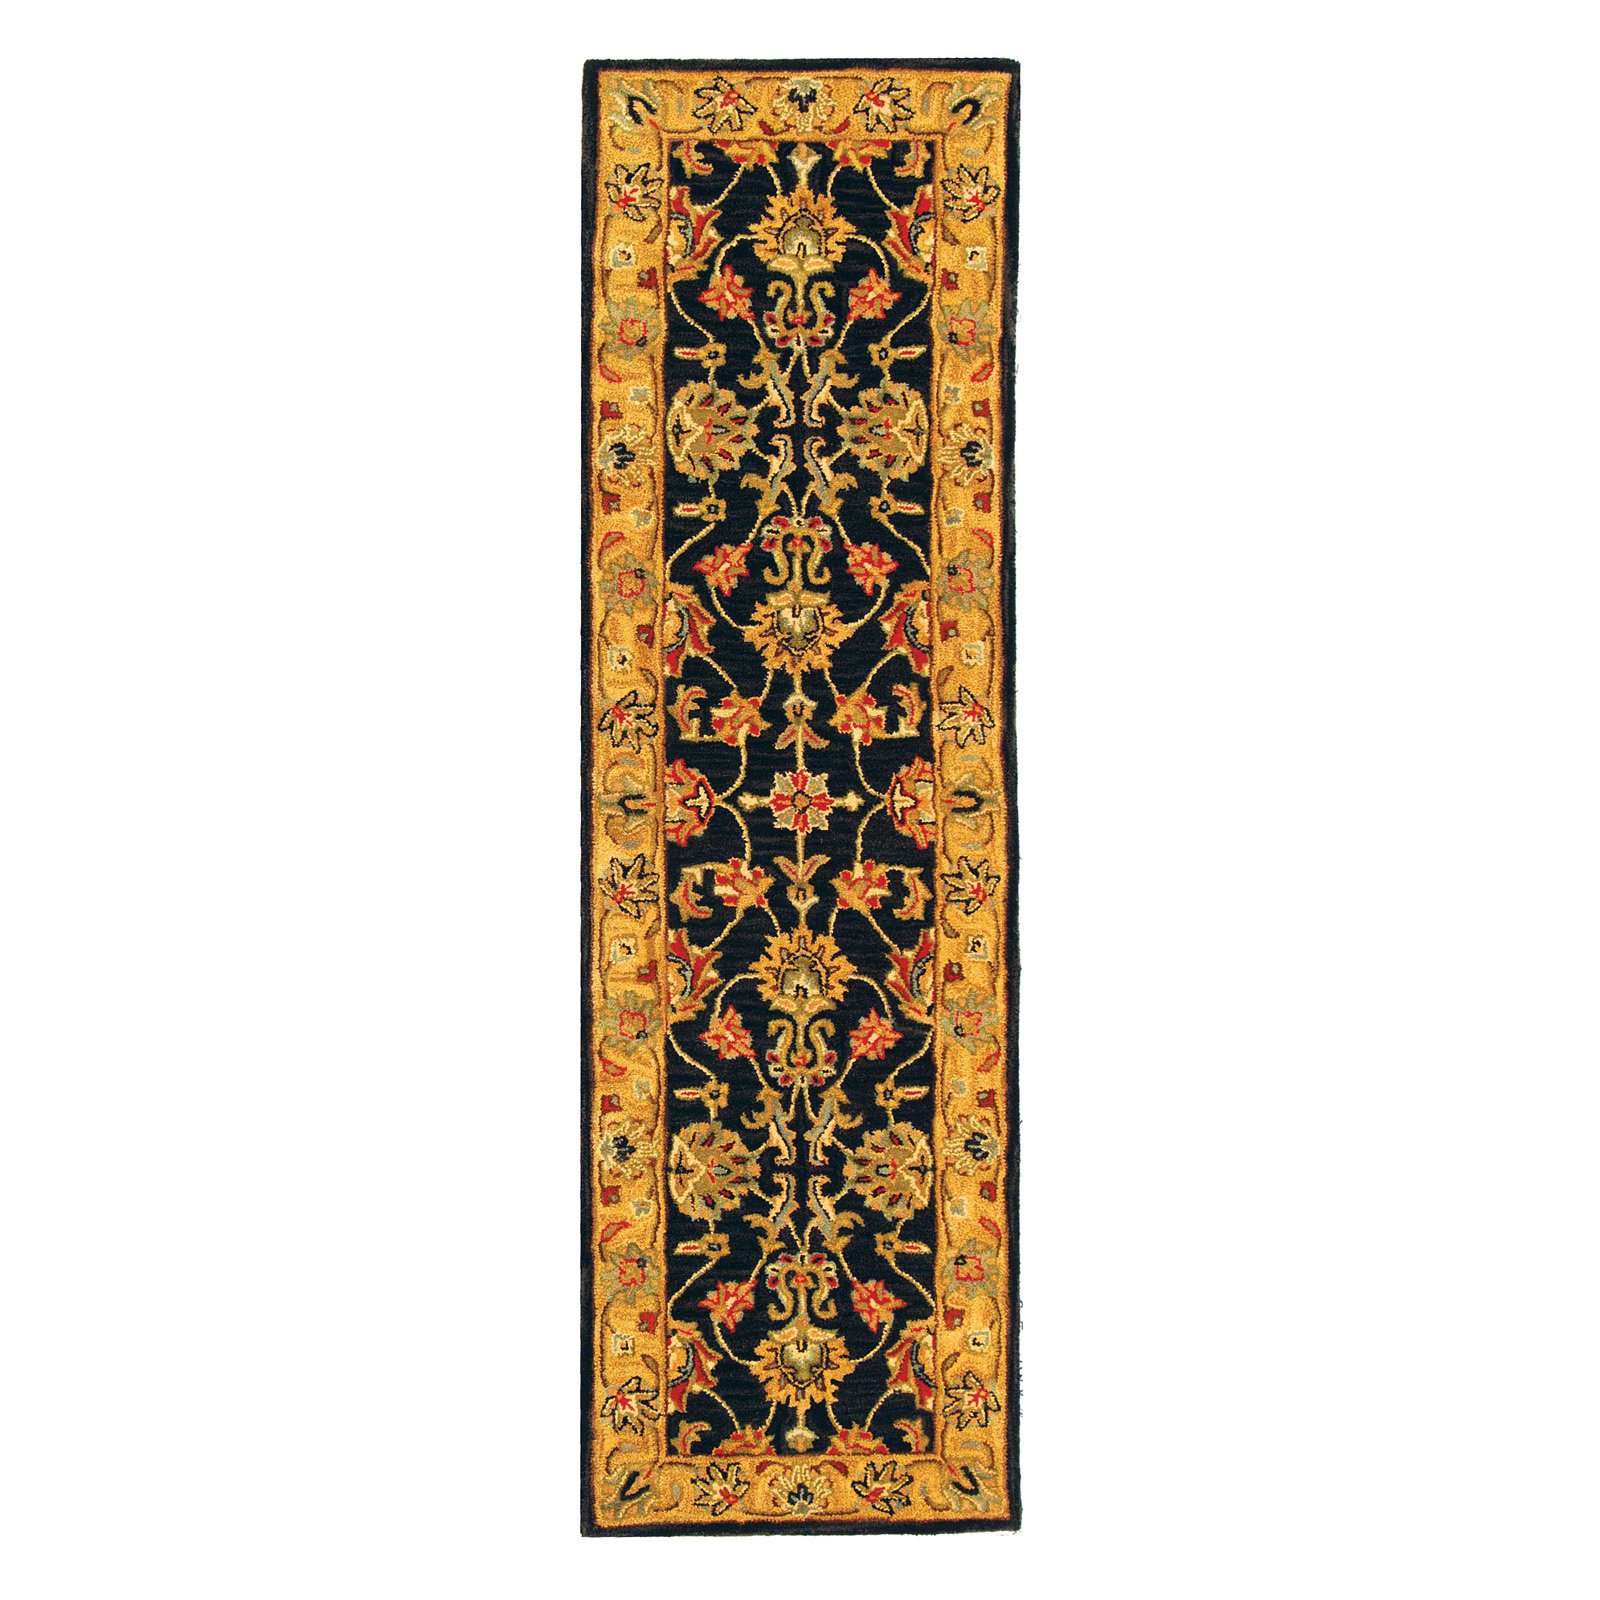 SAFAVIEH Heritage Regis Traditional Wool Area Rug, Charcoal/Gold, 2'3" x 4' - image 4 of 10